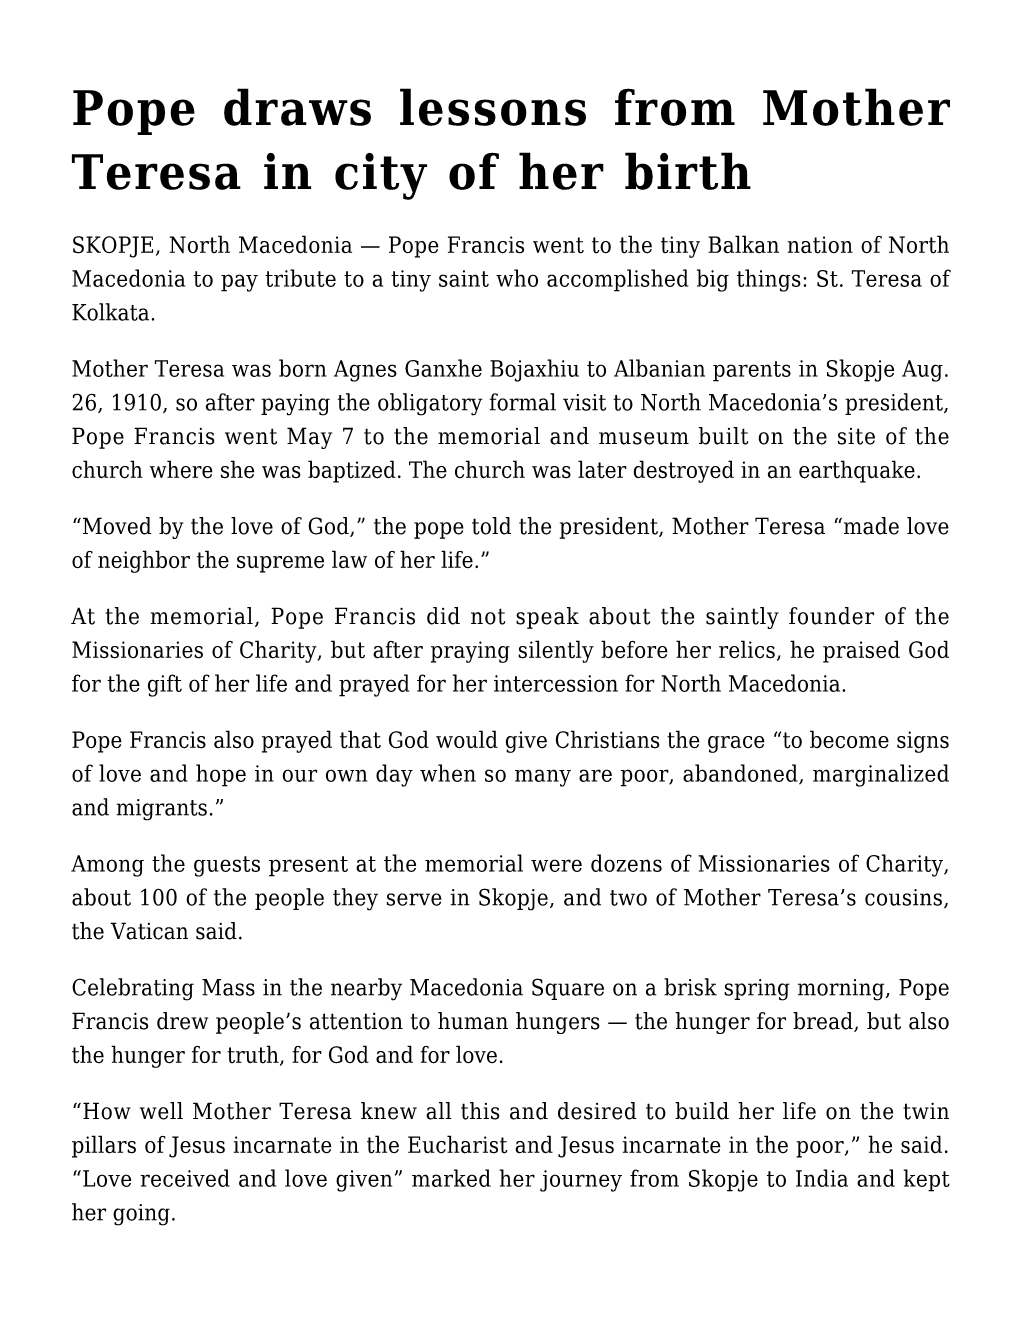 Pope Draws Lessons from Mother Teresa in City of Her Birth